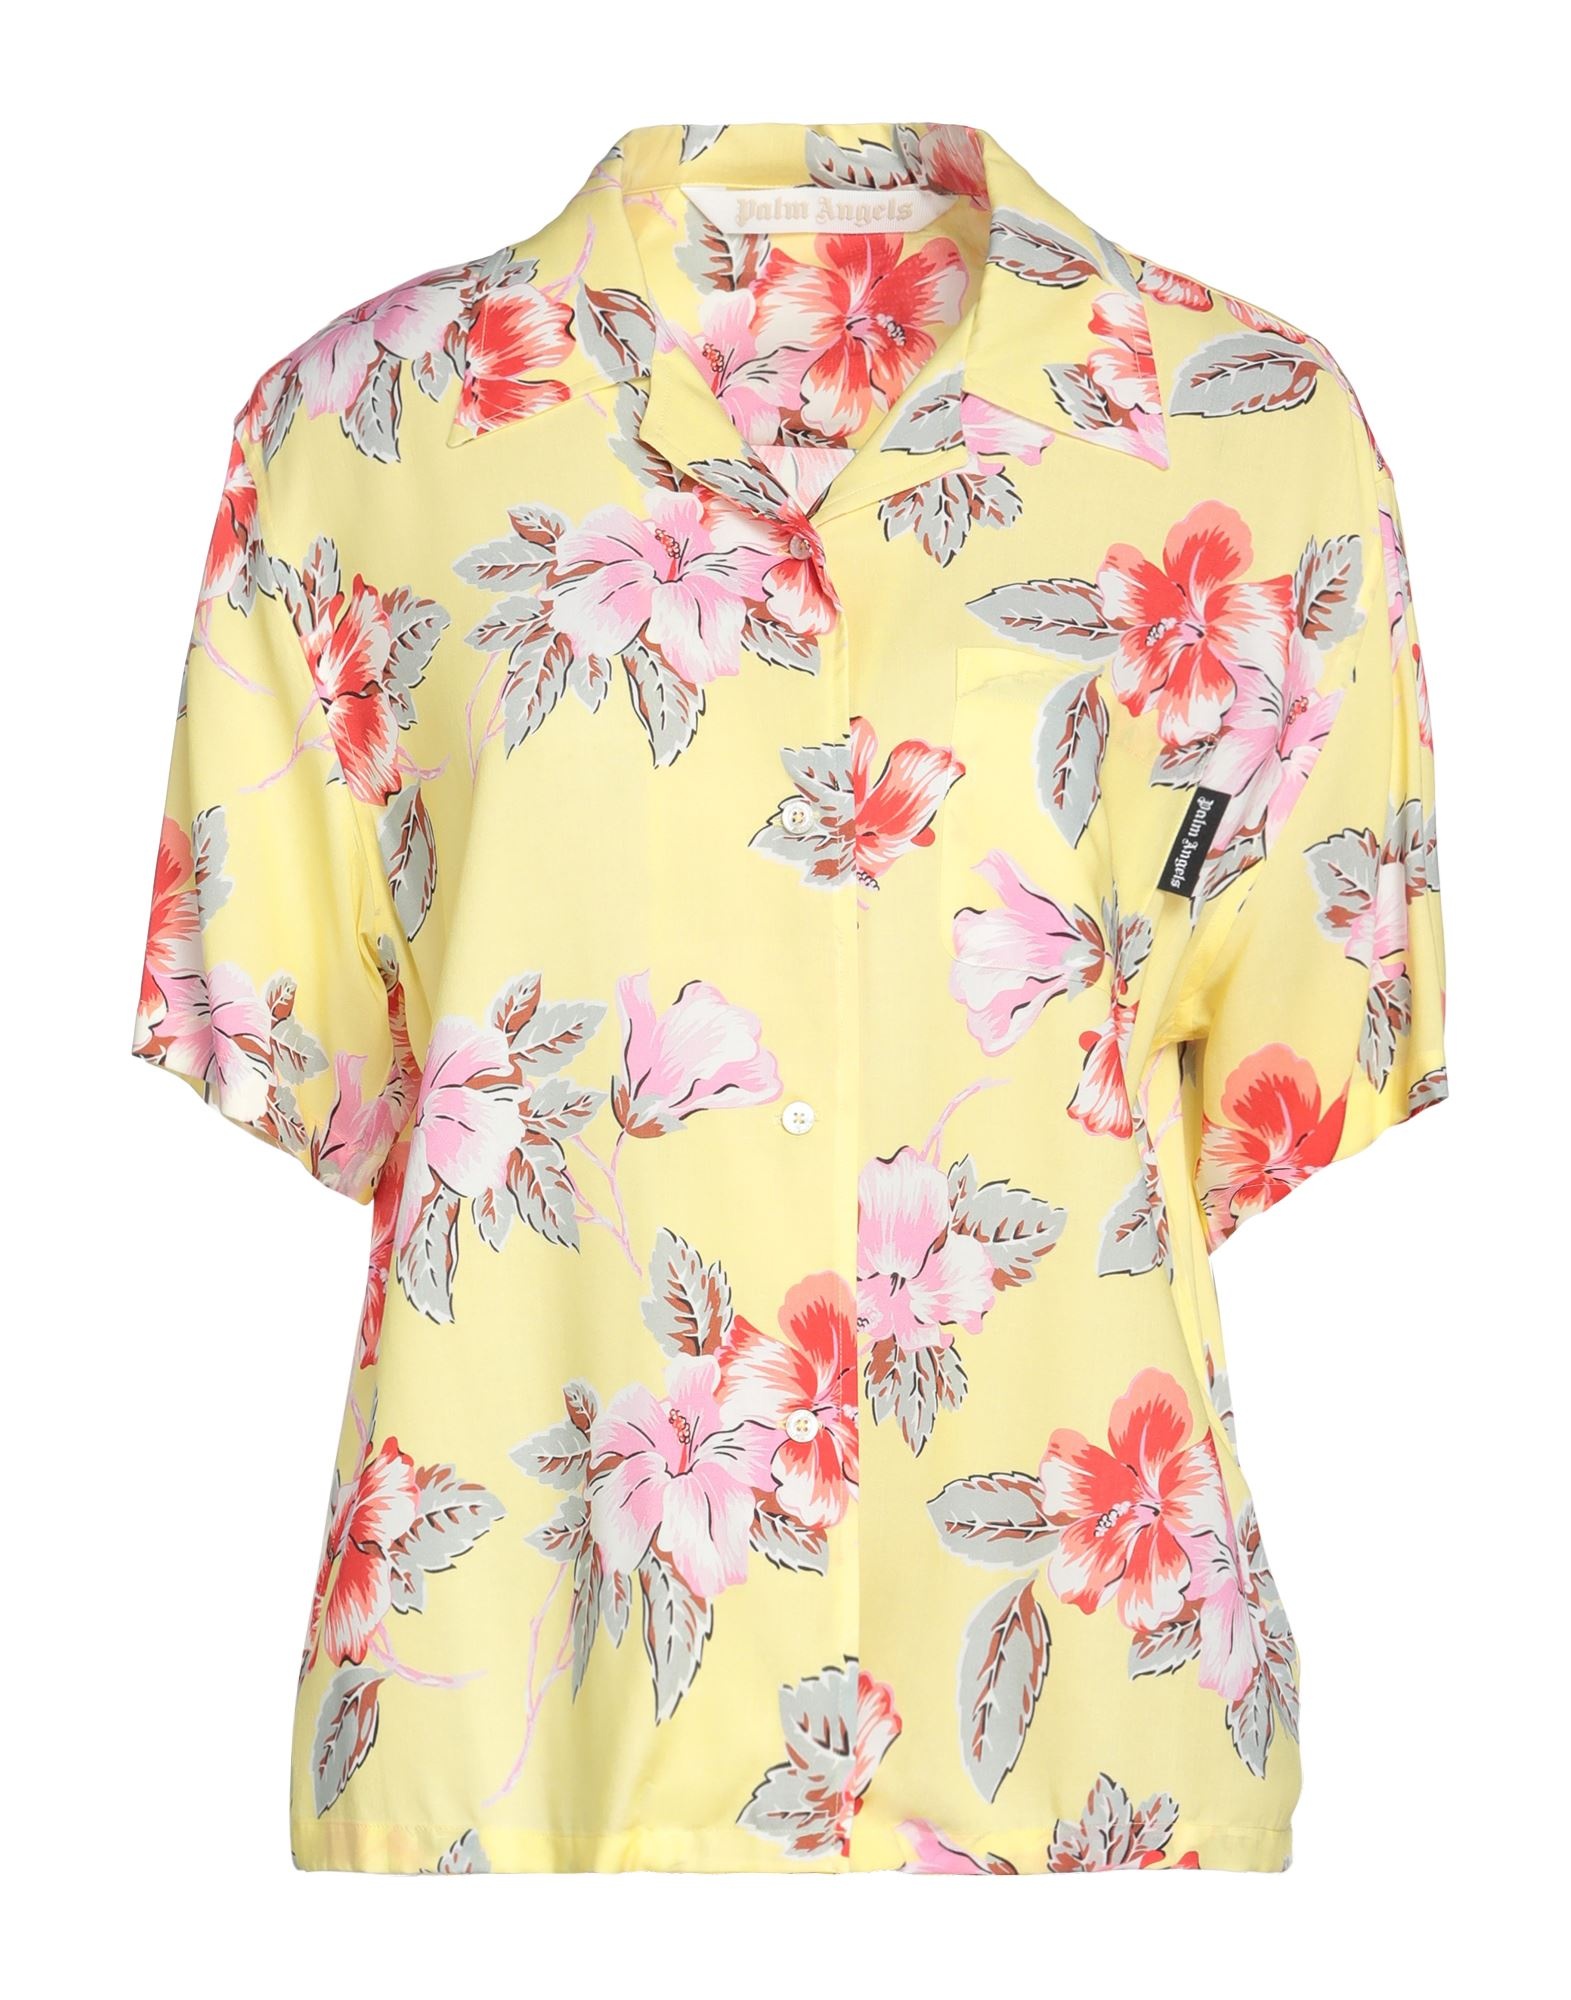 Yellow Women's Floral Shirts & Blouses - 1